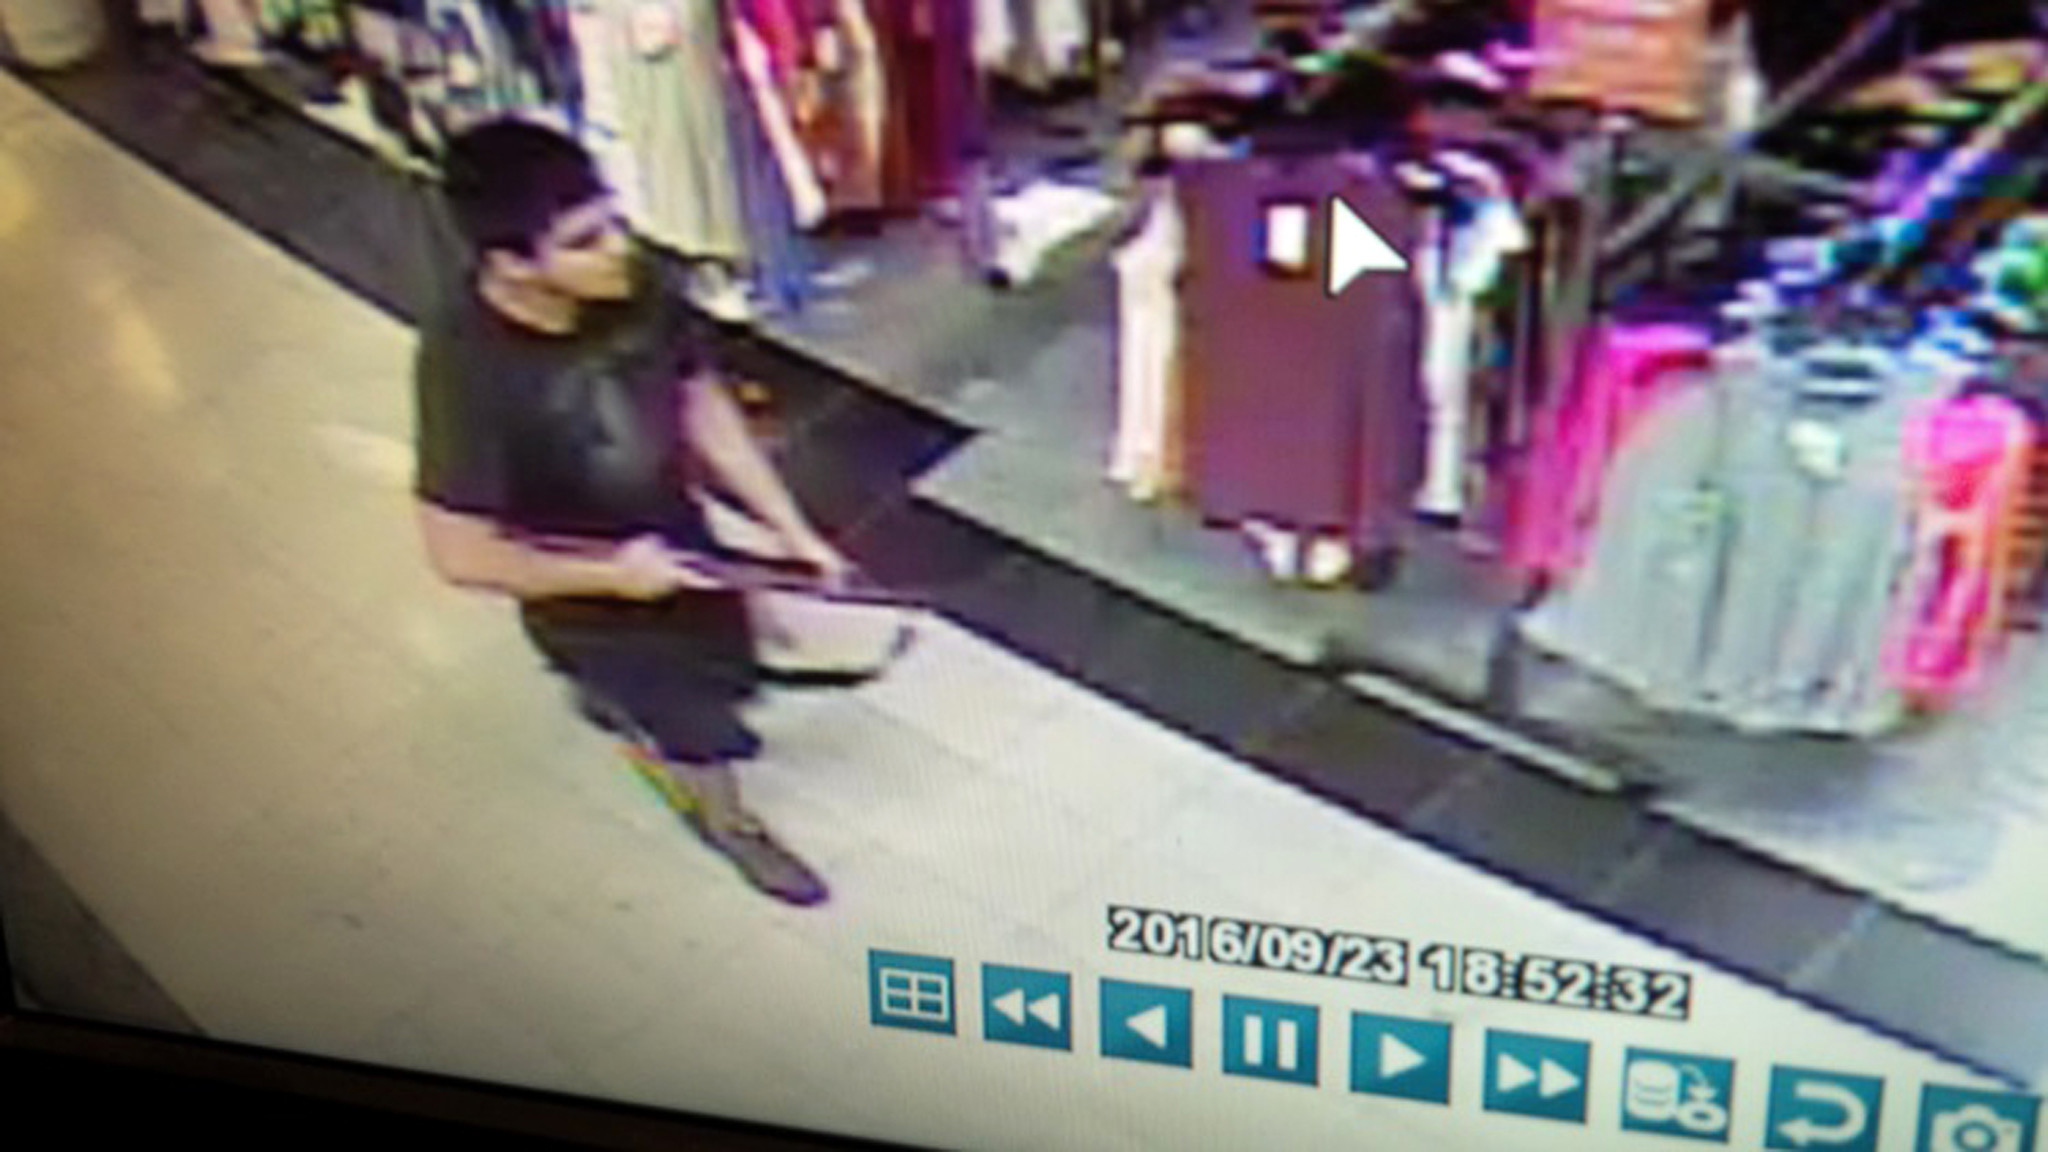 Suspect arrested in deadly Washington state mall shooting, authorities